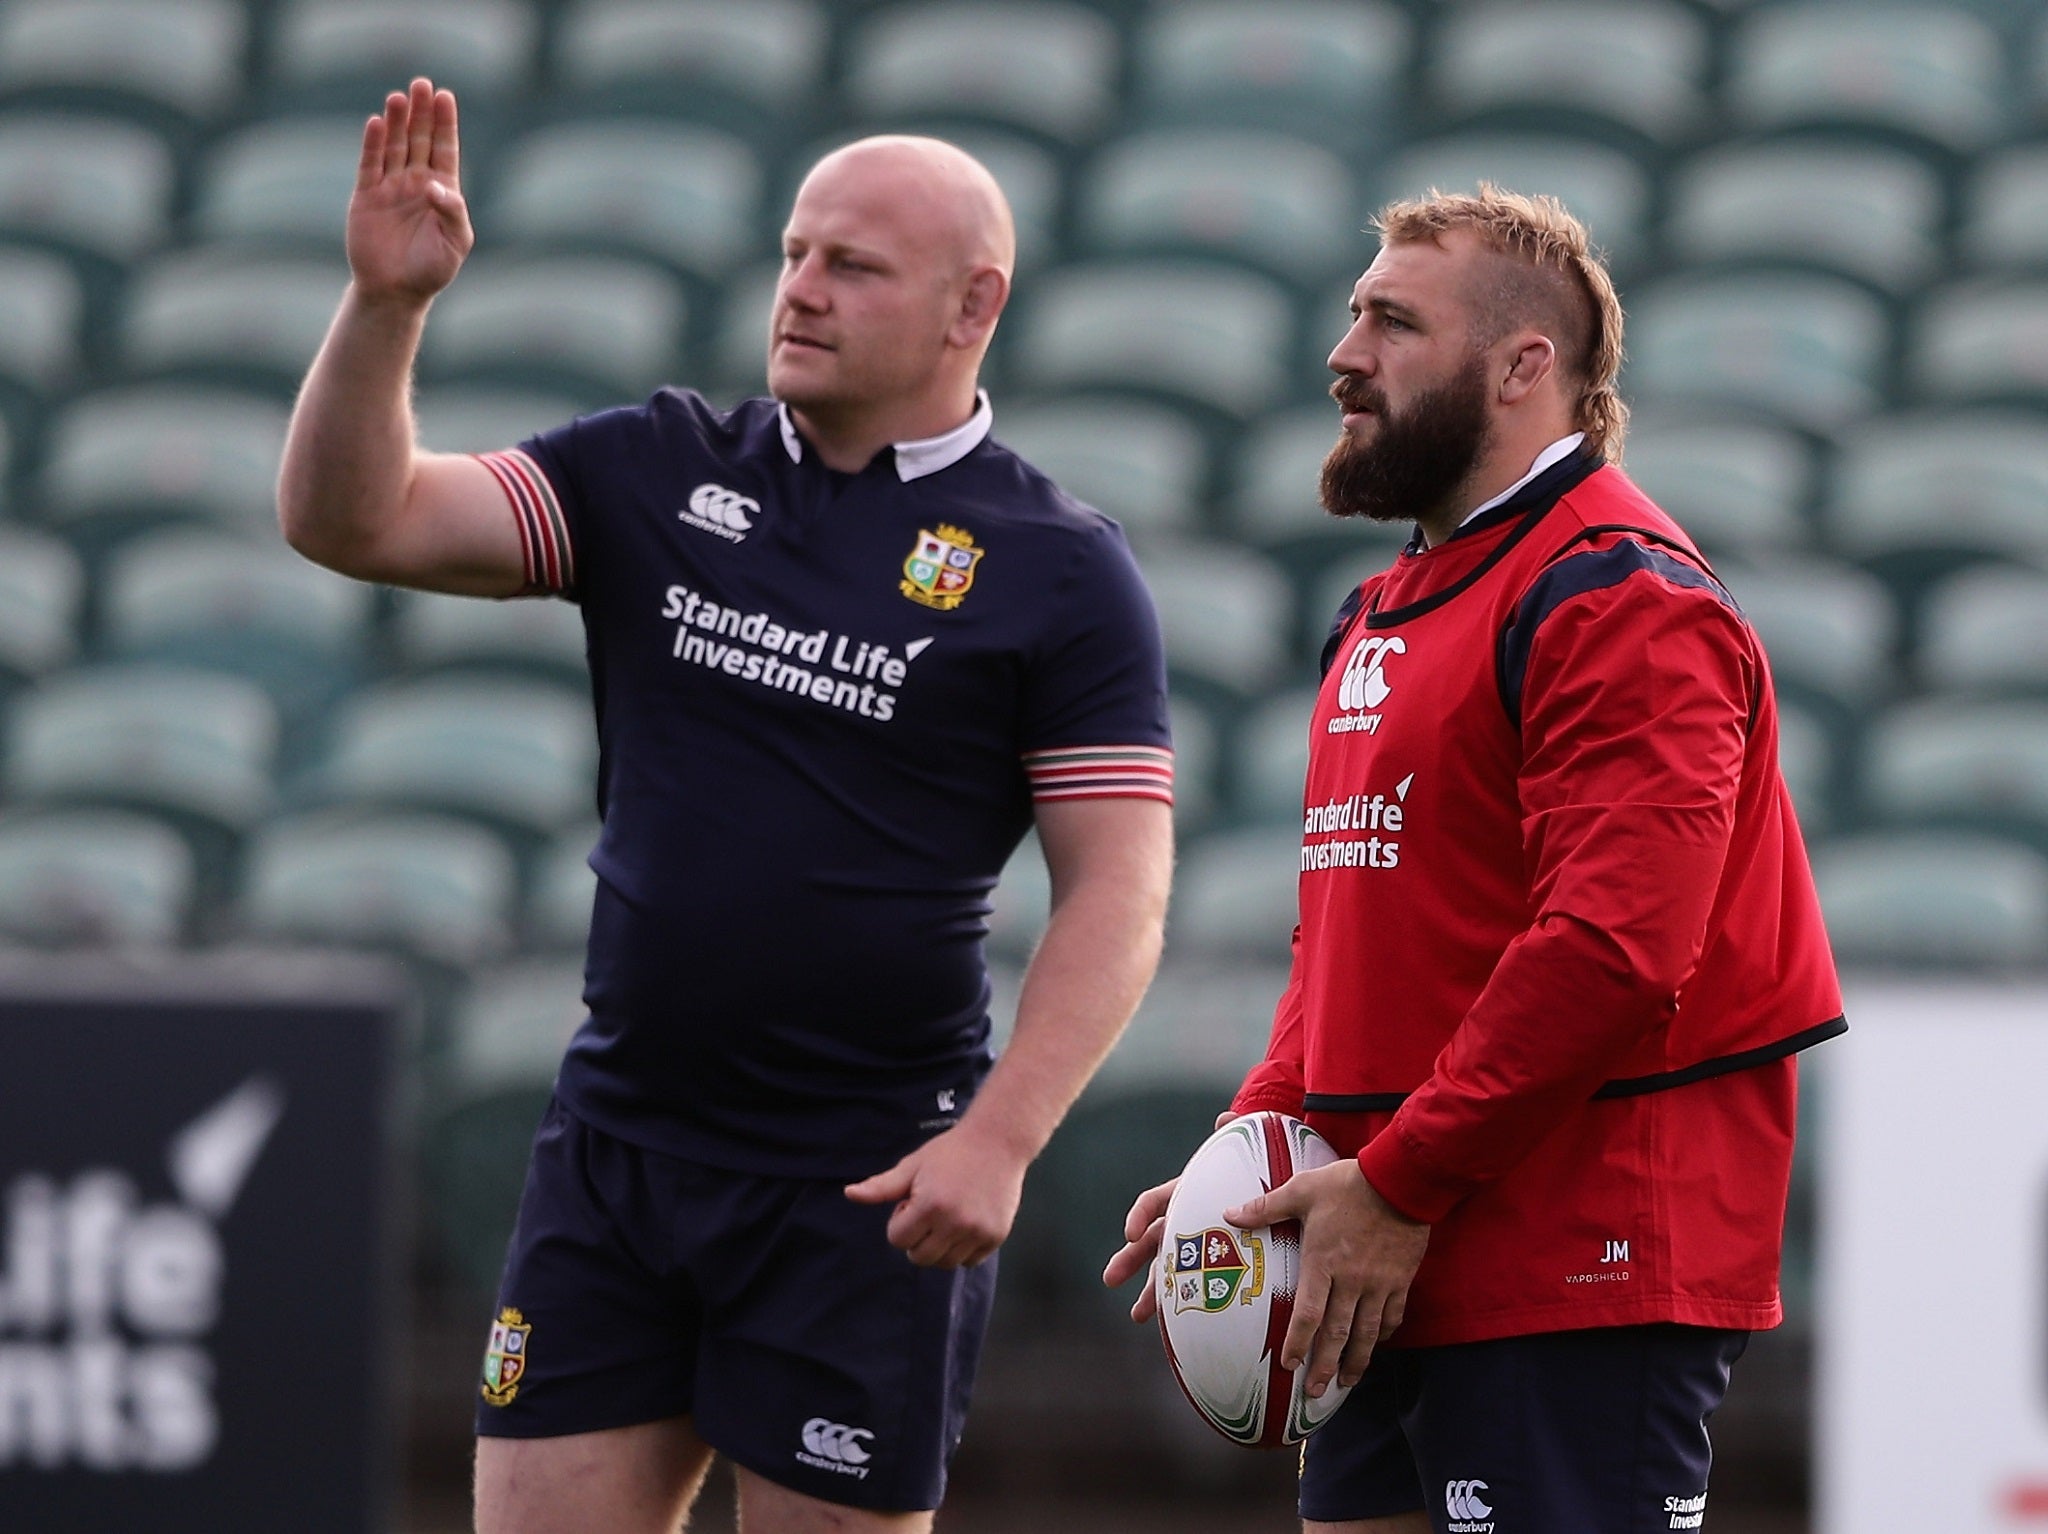 Dan Cole accepts he will not be resorting to any flair as he focuses on the basics